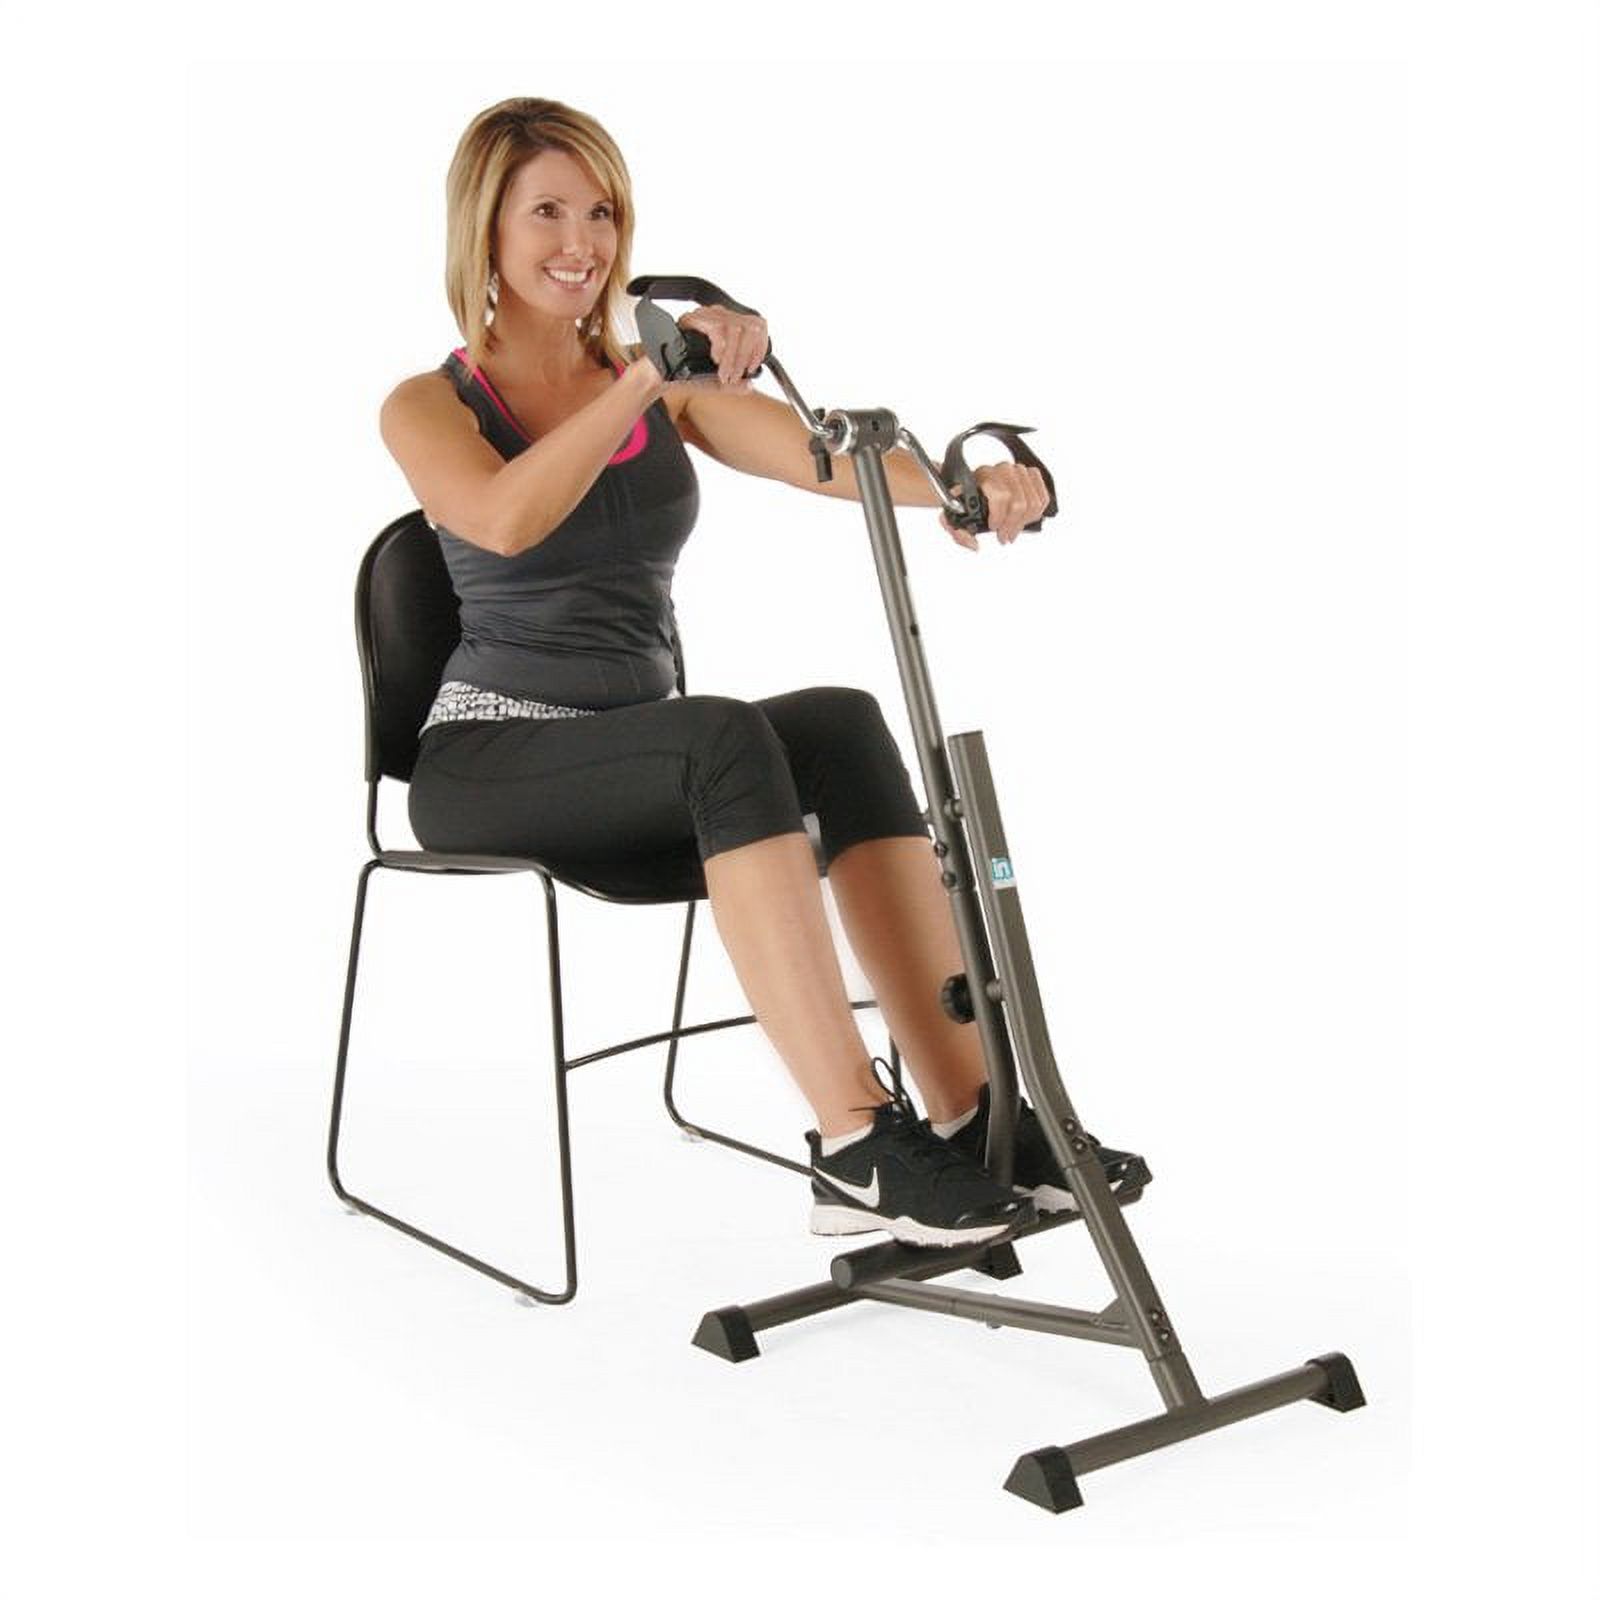 Stamina InStride Total Body Cycle with Weighted Pedals - image 2 of 3